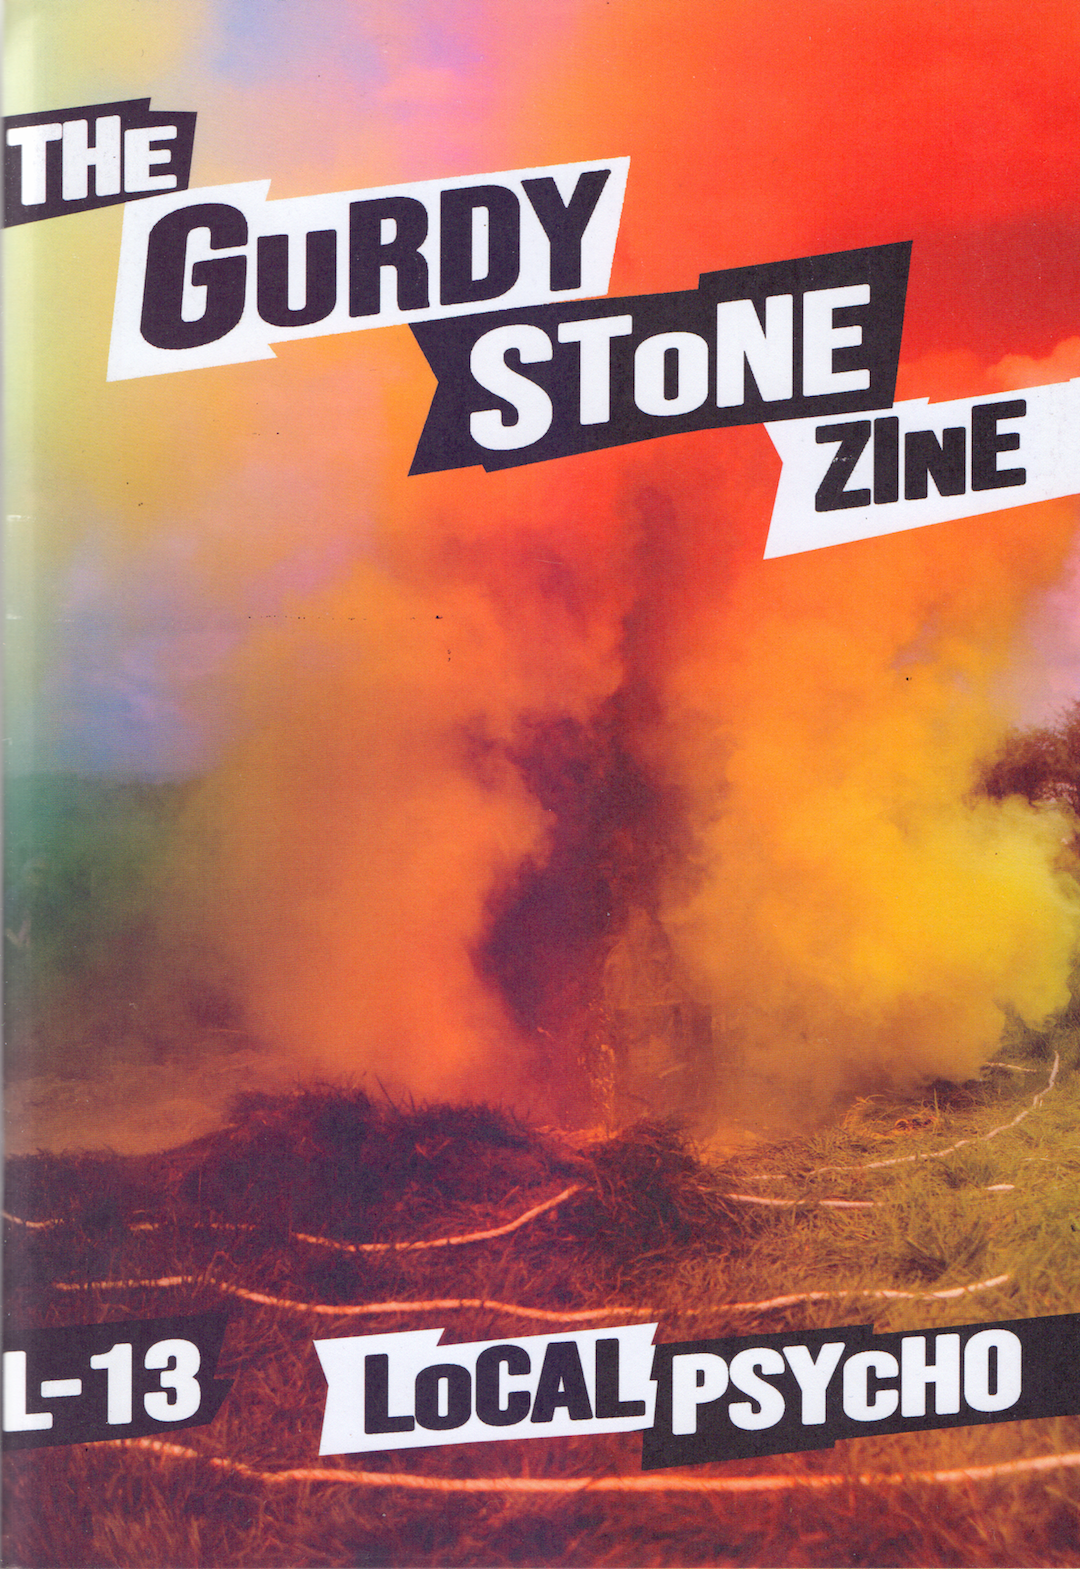 THE GURDY STONE ZINE with Flexi-disc Field Recording and Poster, Local Psycho